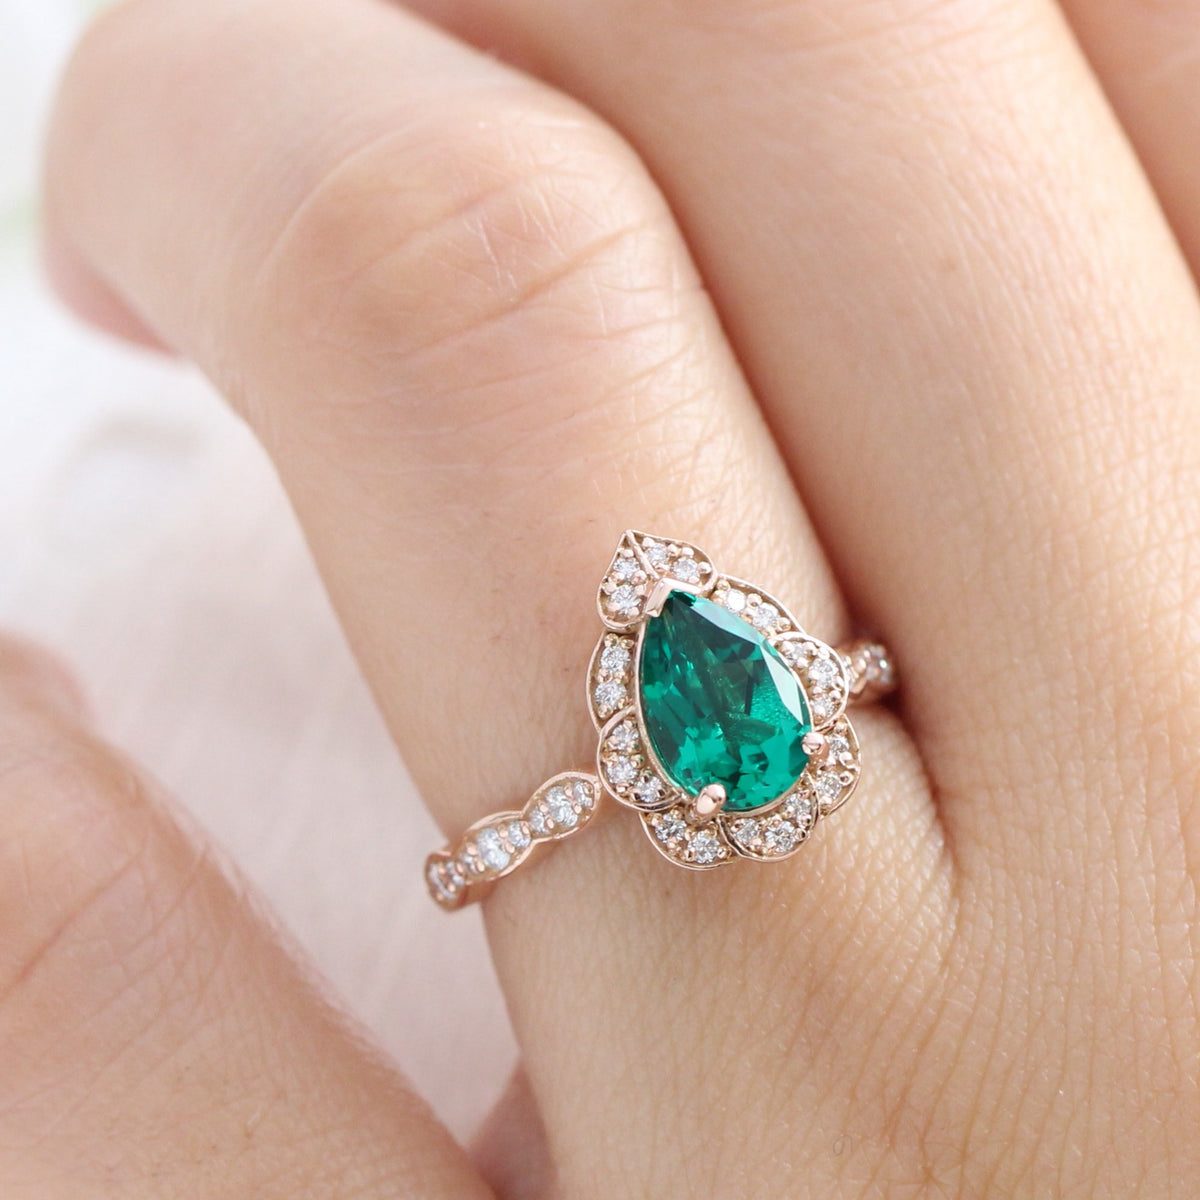 Vintage halo pear emerald ring stack rose gold curved diamond wedding band la more design jewelry